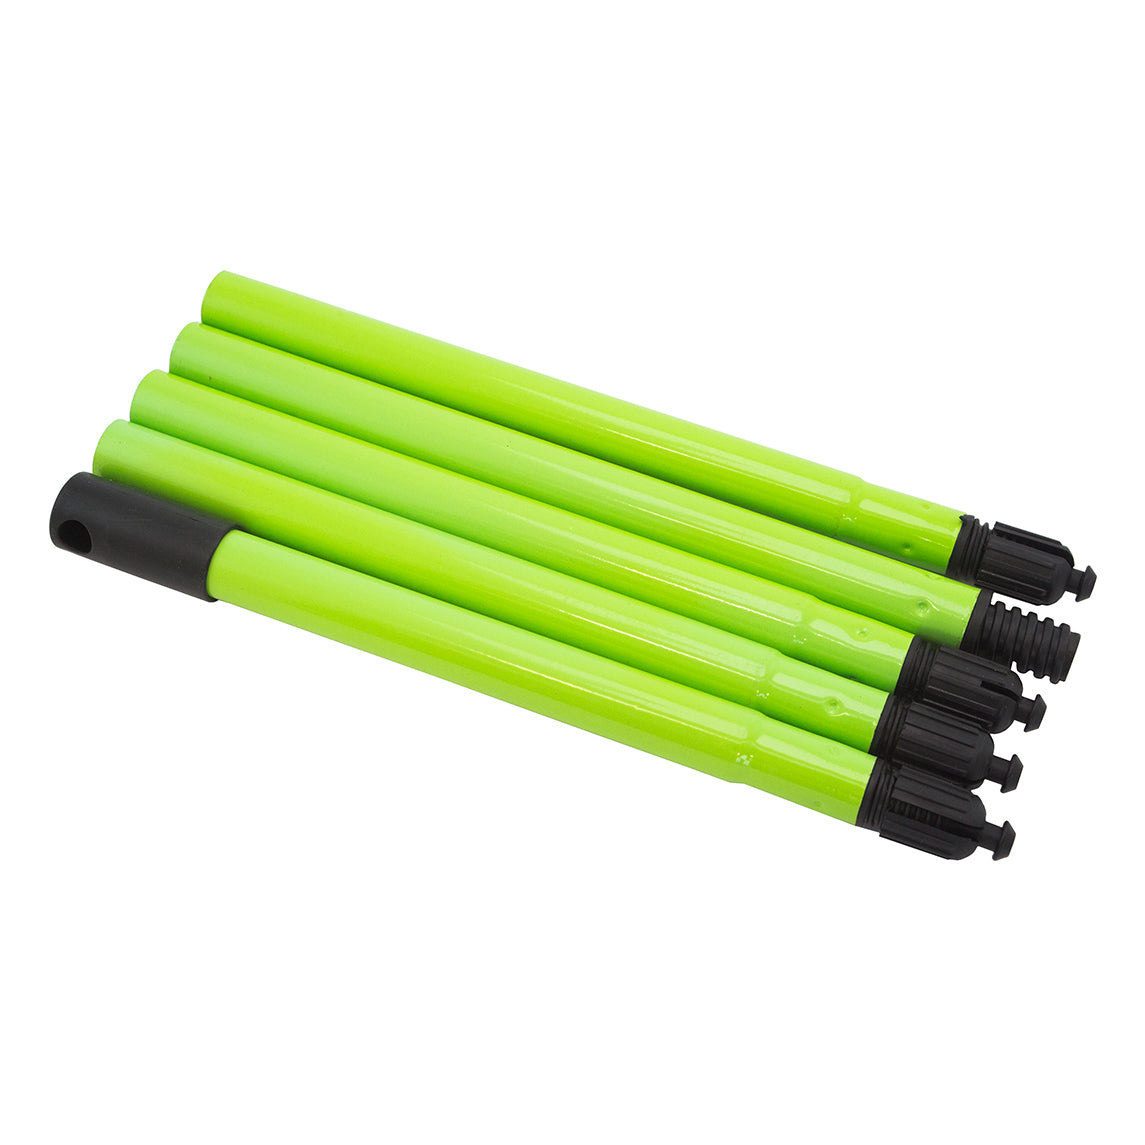 Collapsible Extension Pole